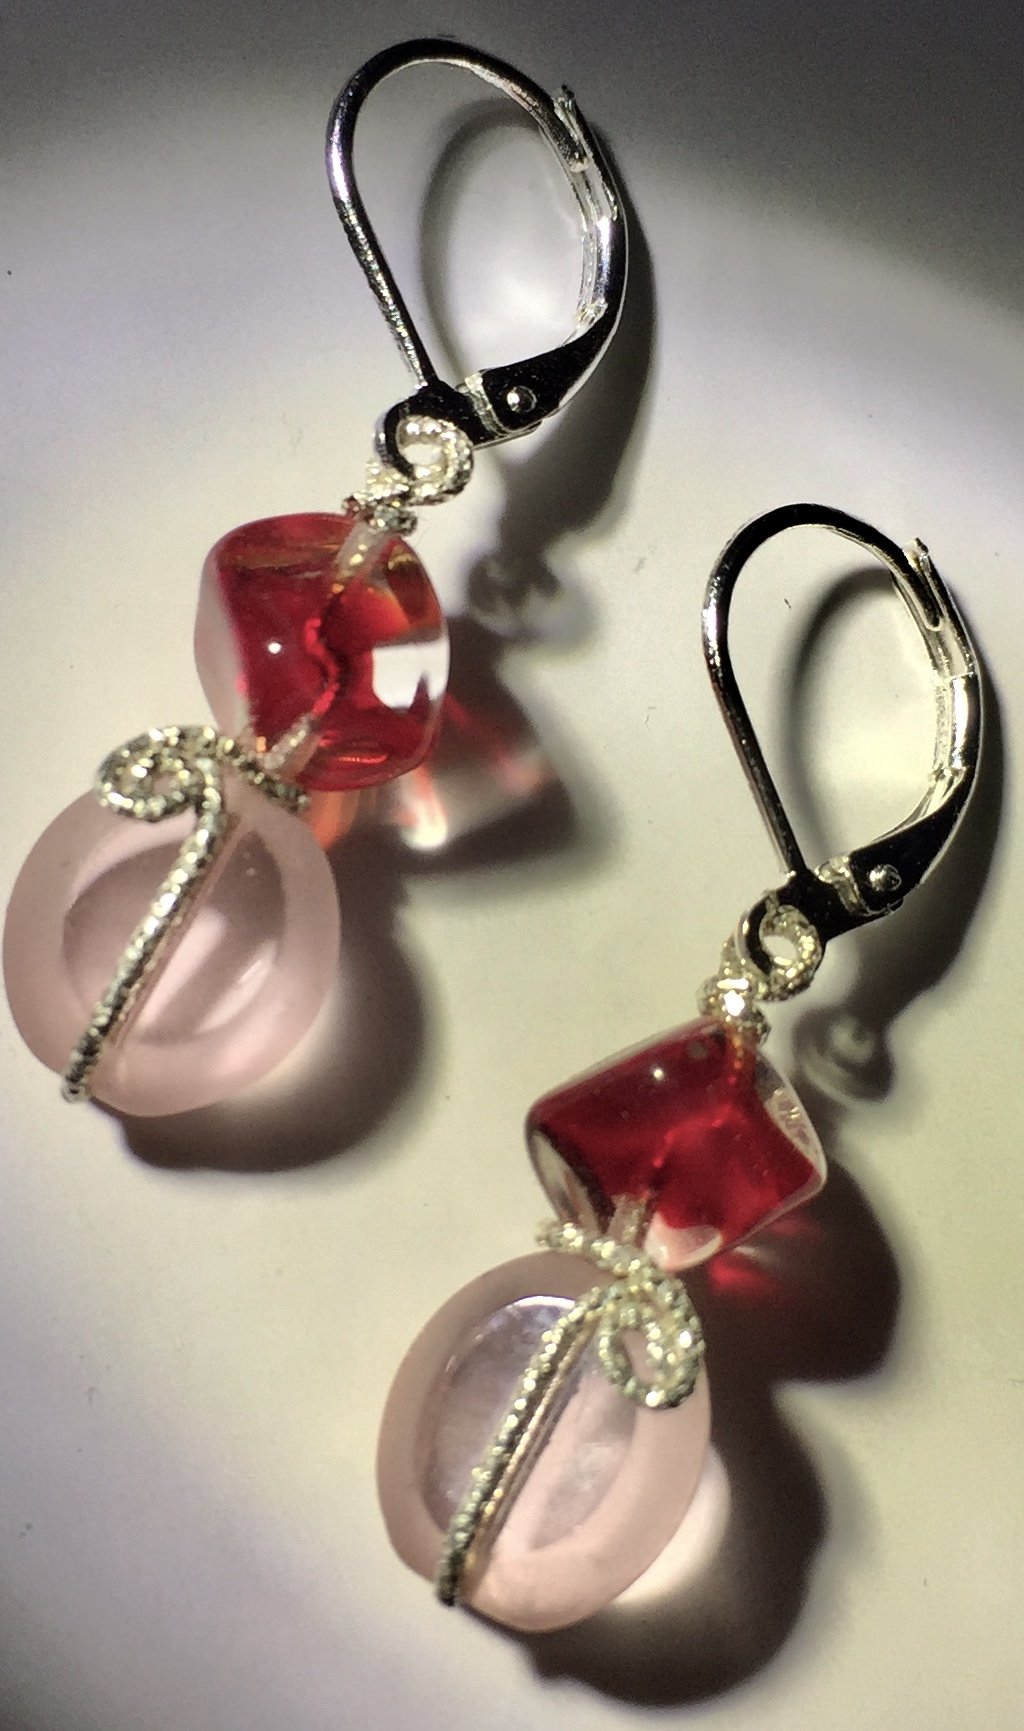 Red glass cubes support delicate pink glass ovals, interspersed with diamond-cut sterling silver wire in these 1.5